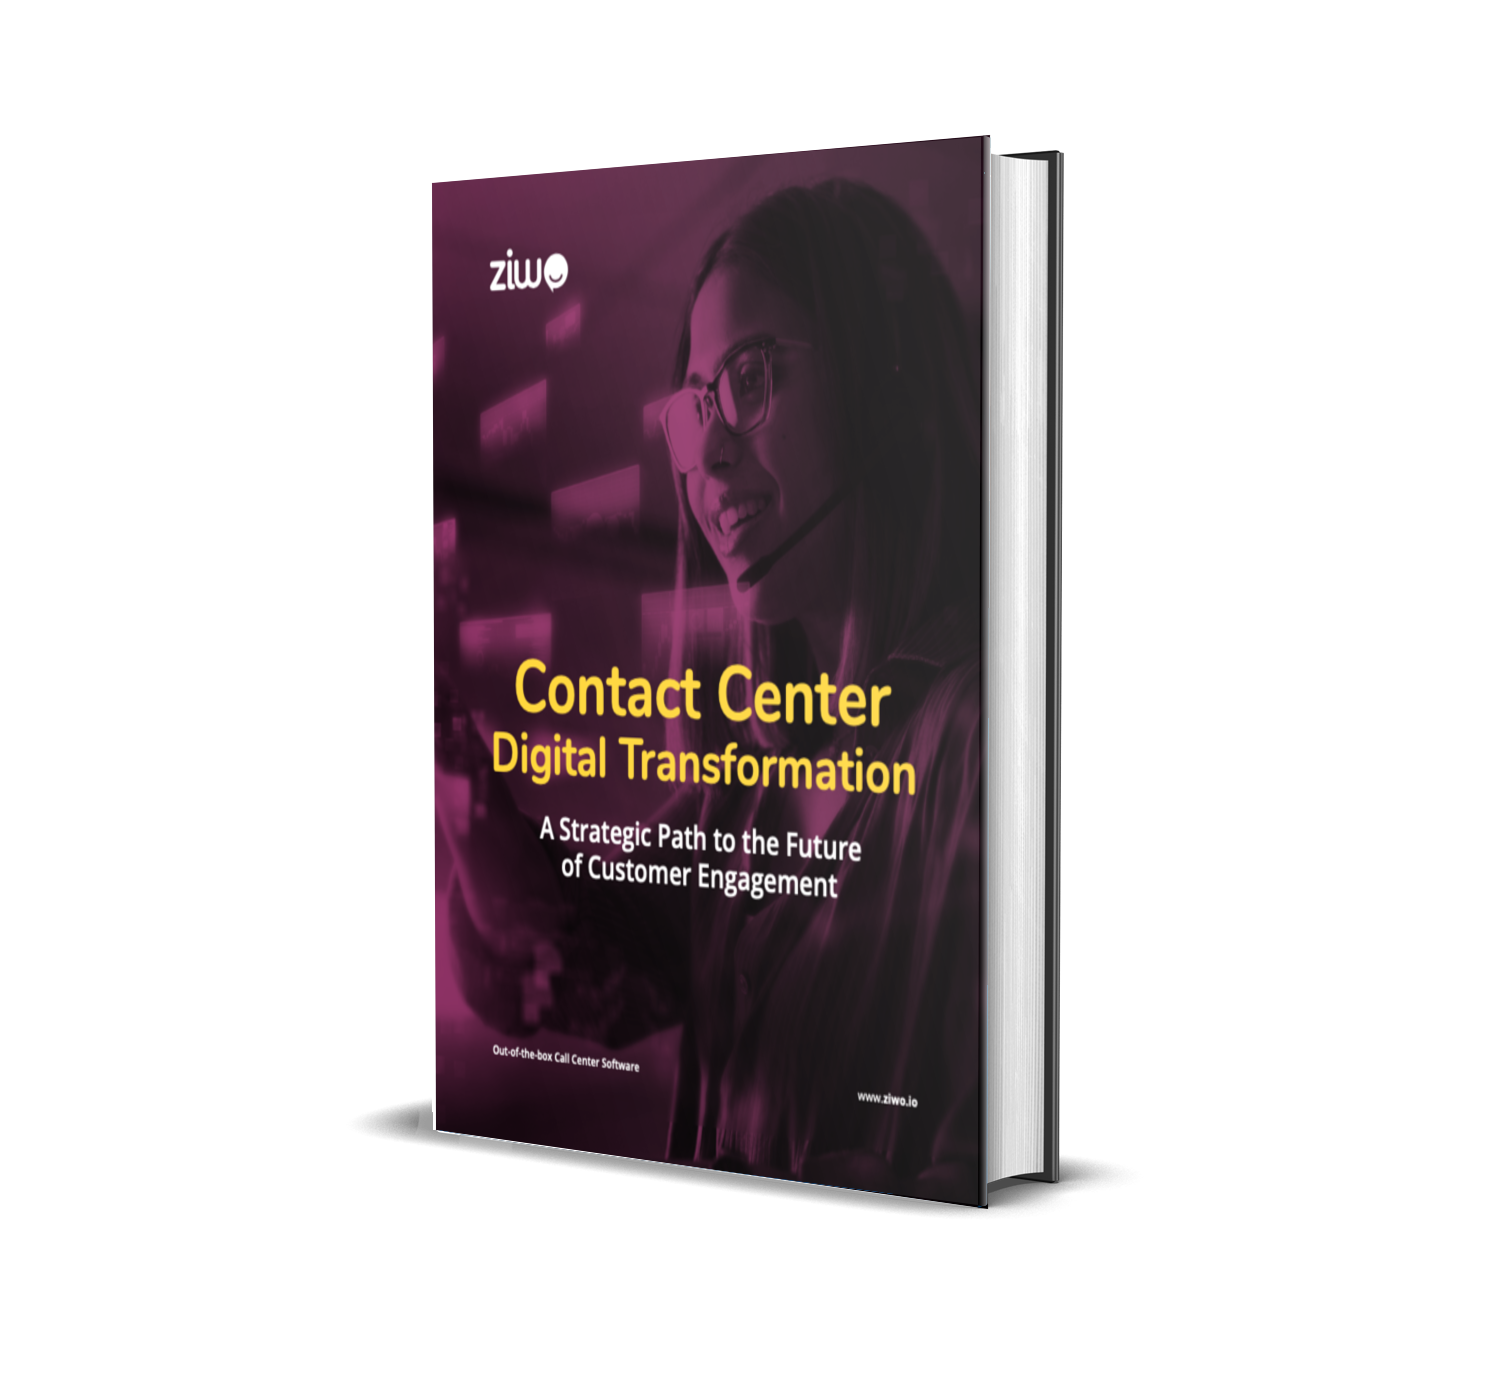 A book with a title "Contact Center Digital Transformation"